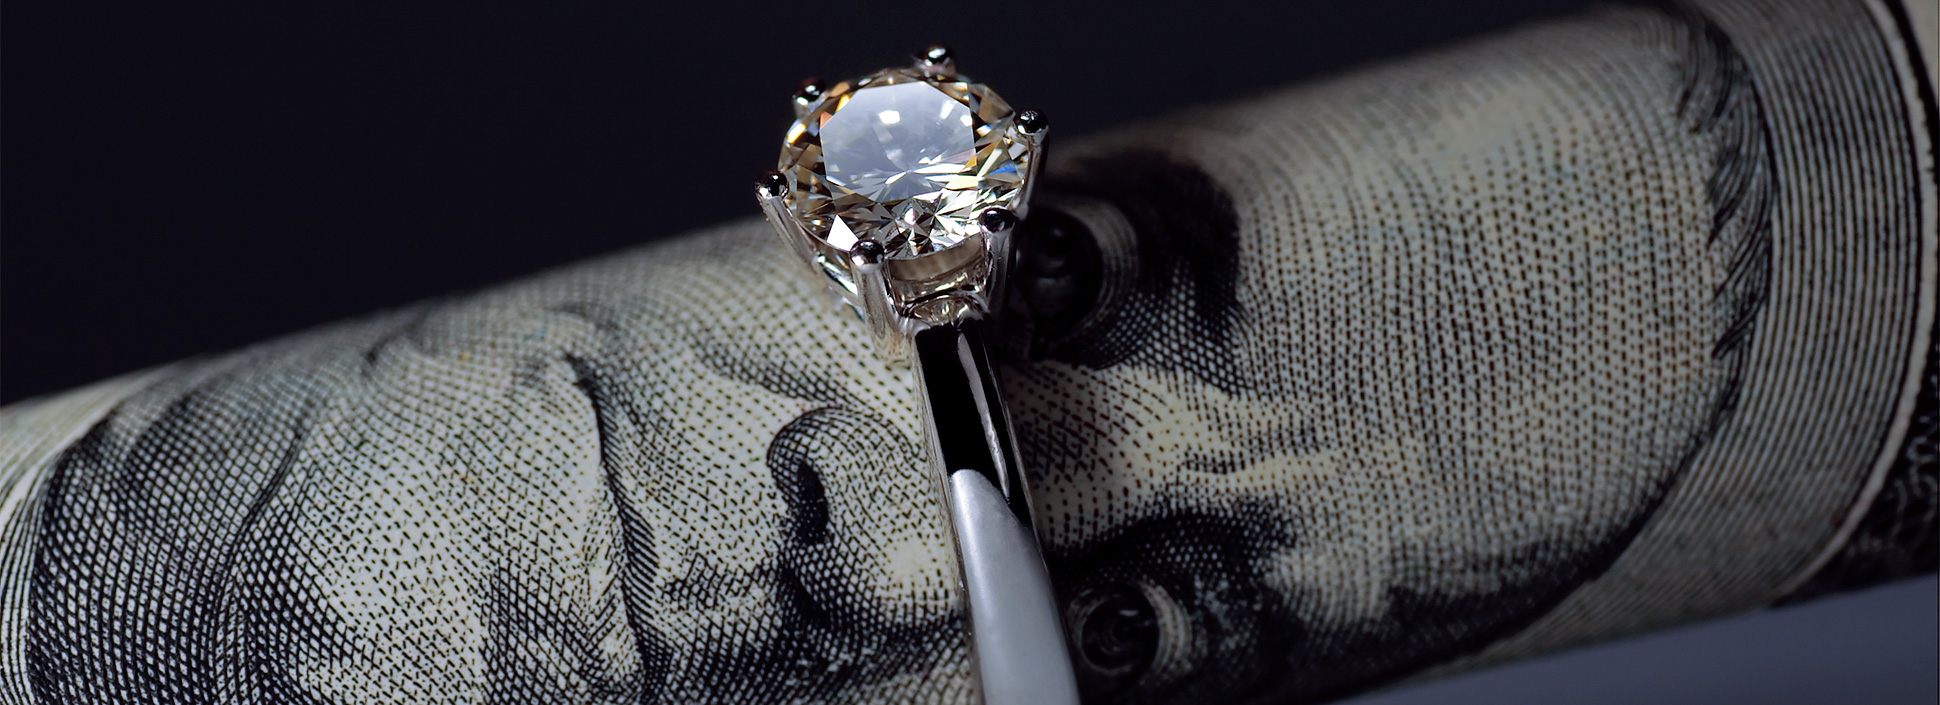 Engagement Rings Cost More Than $8,000 in These States — See How You Can  Save